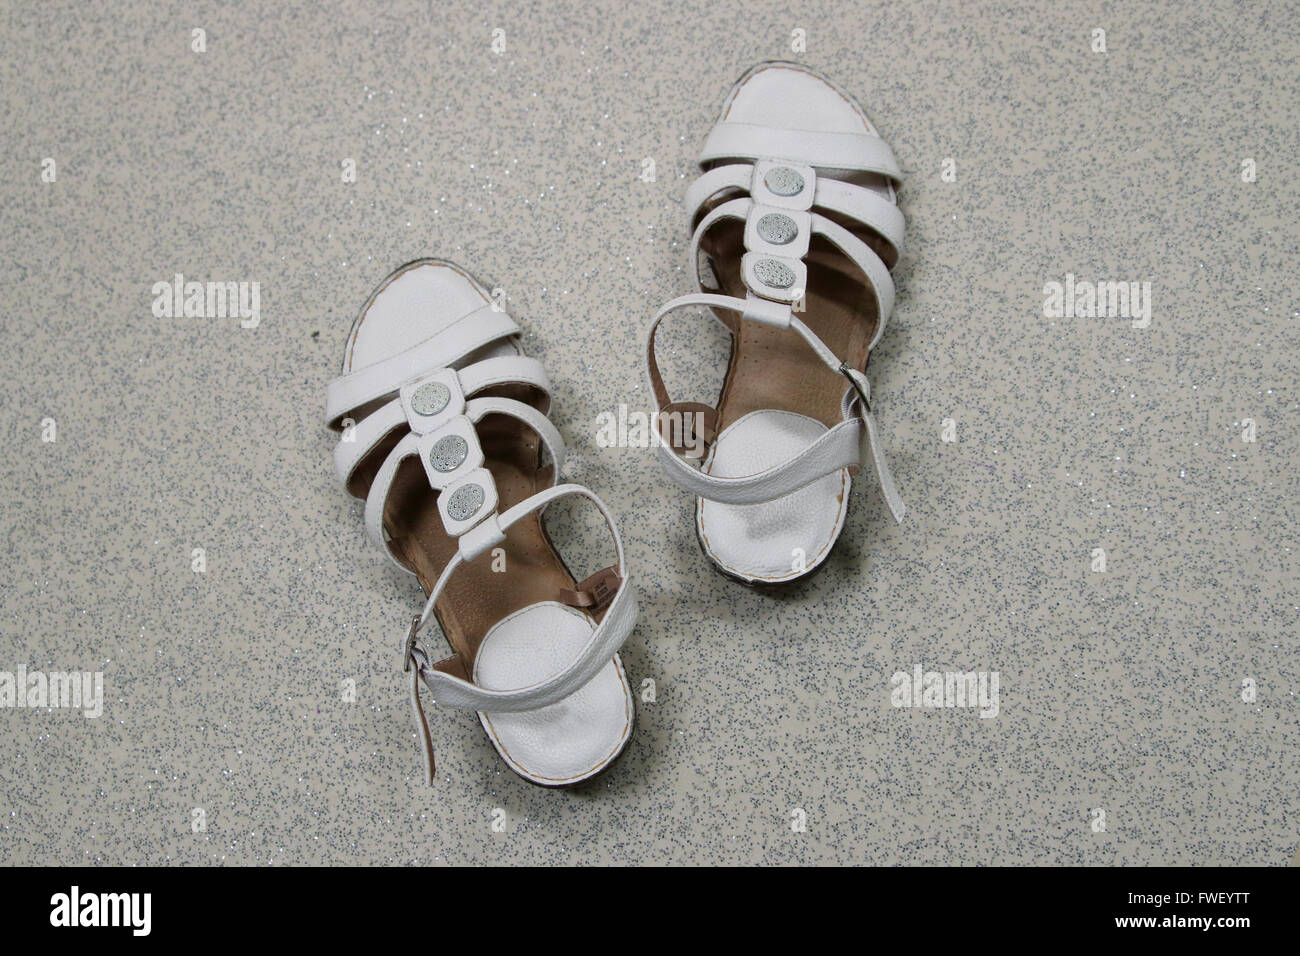 A Pair of white sandals on the floor Stock Photo